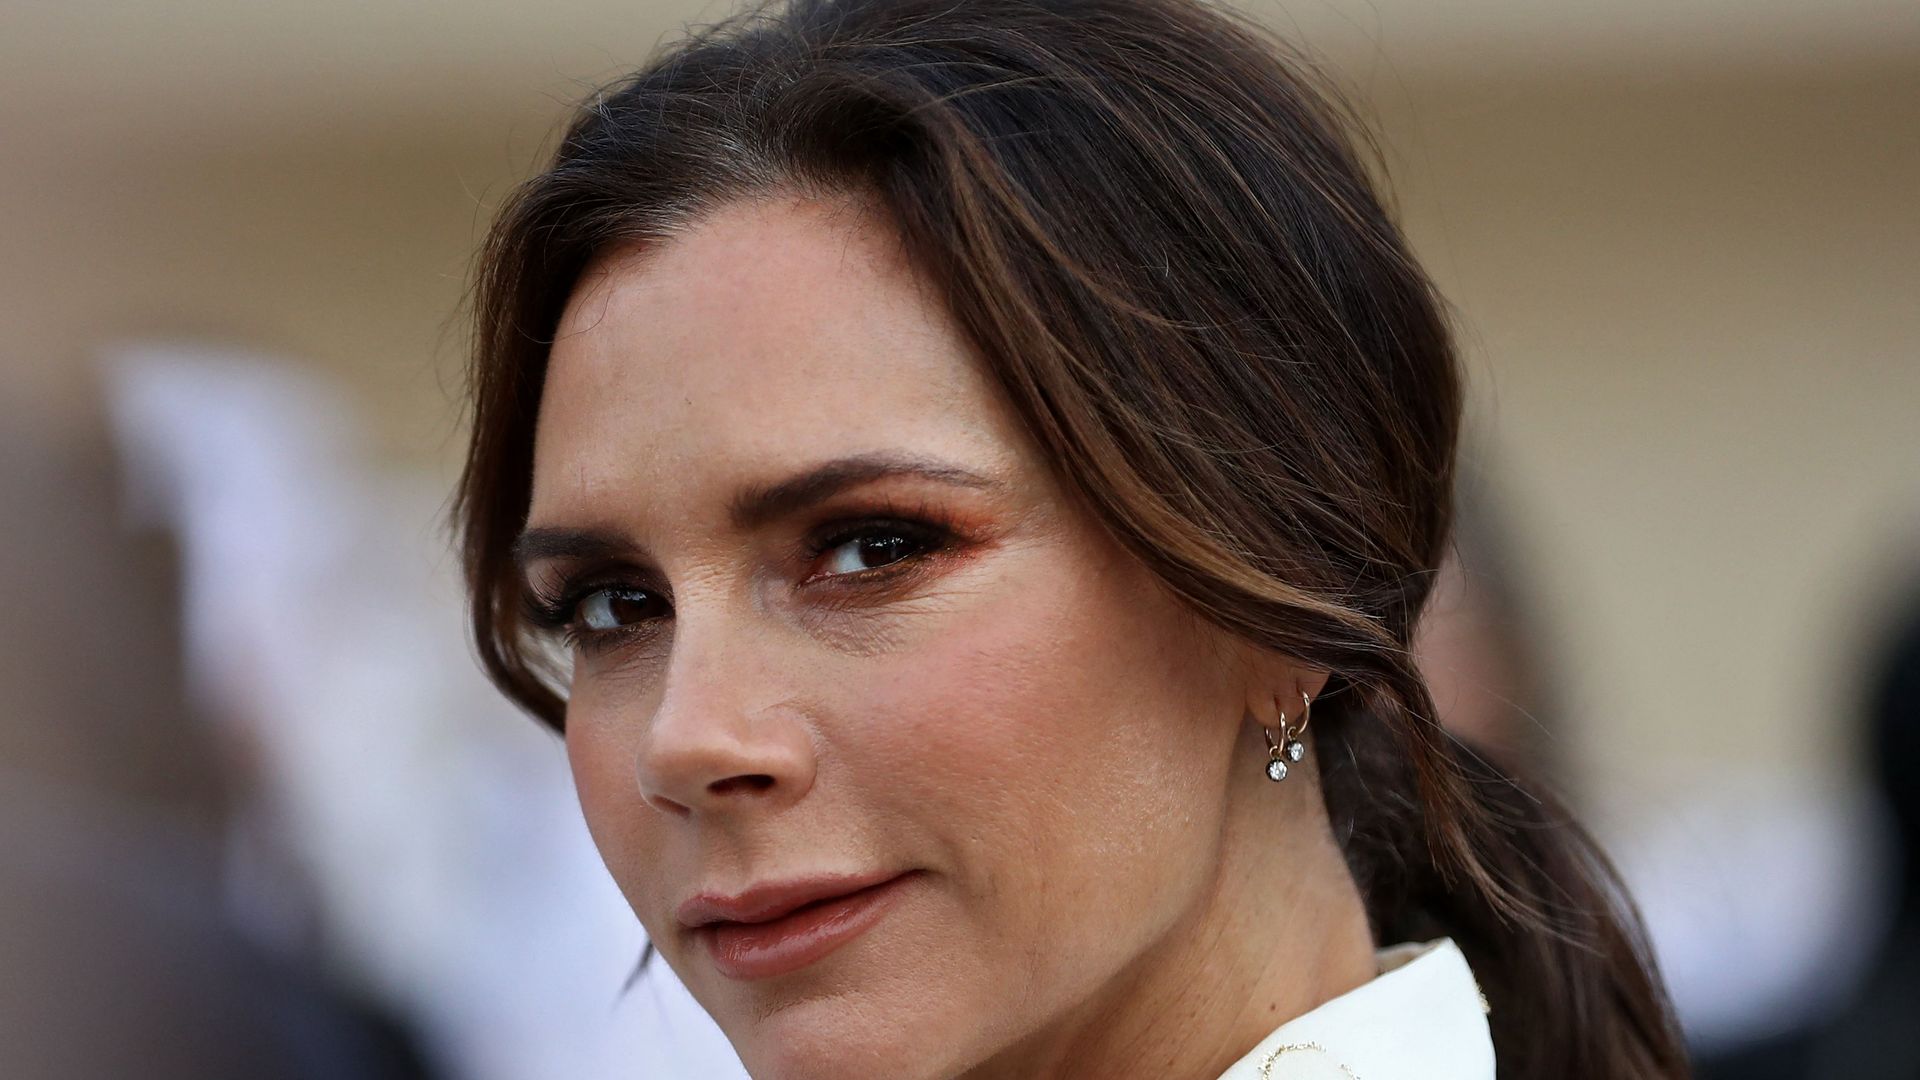 Victoria Beckham flaunts toned abs mid-workout despite injury - 'Can't ...